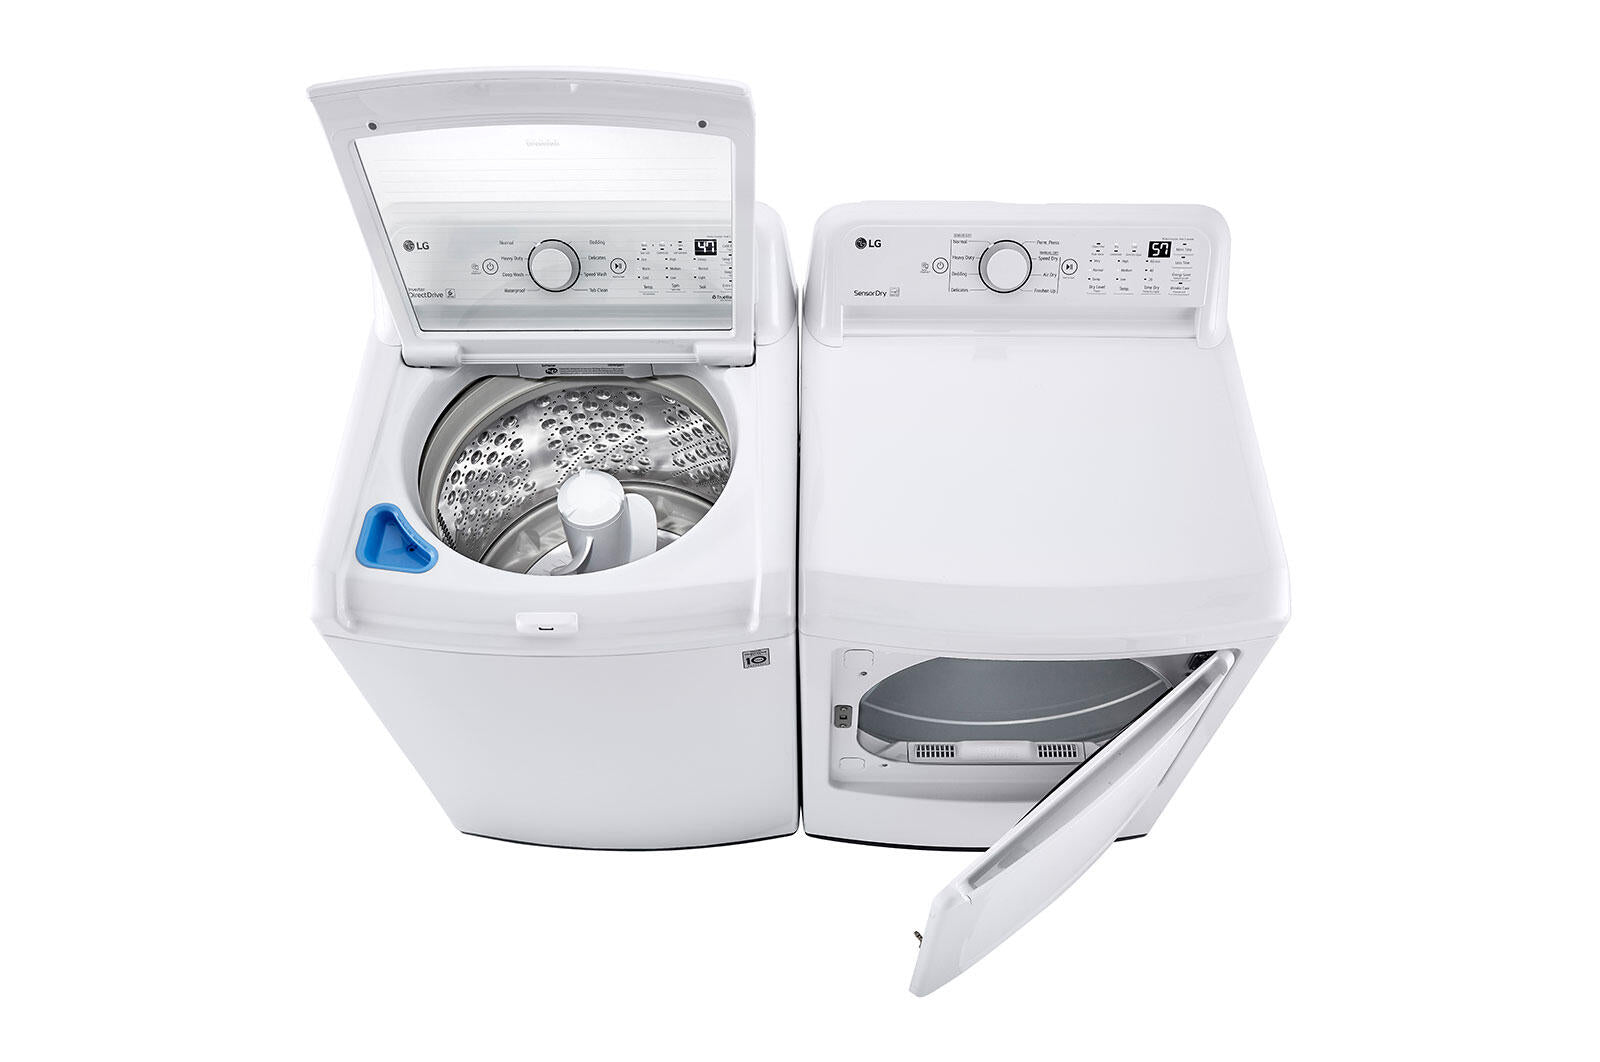 LG 5.0 cu. ft. Top Load Washer in White with Impeller, NeverRust